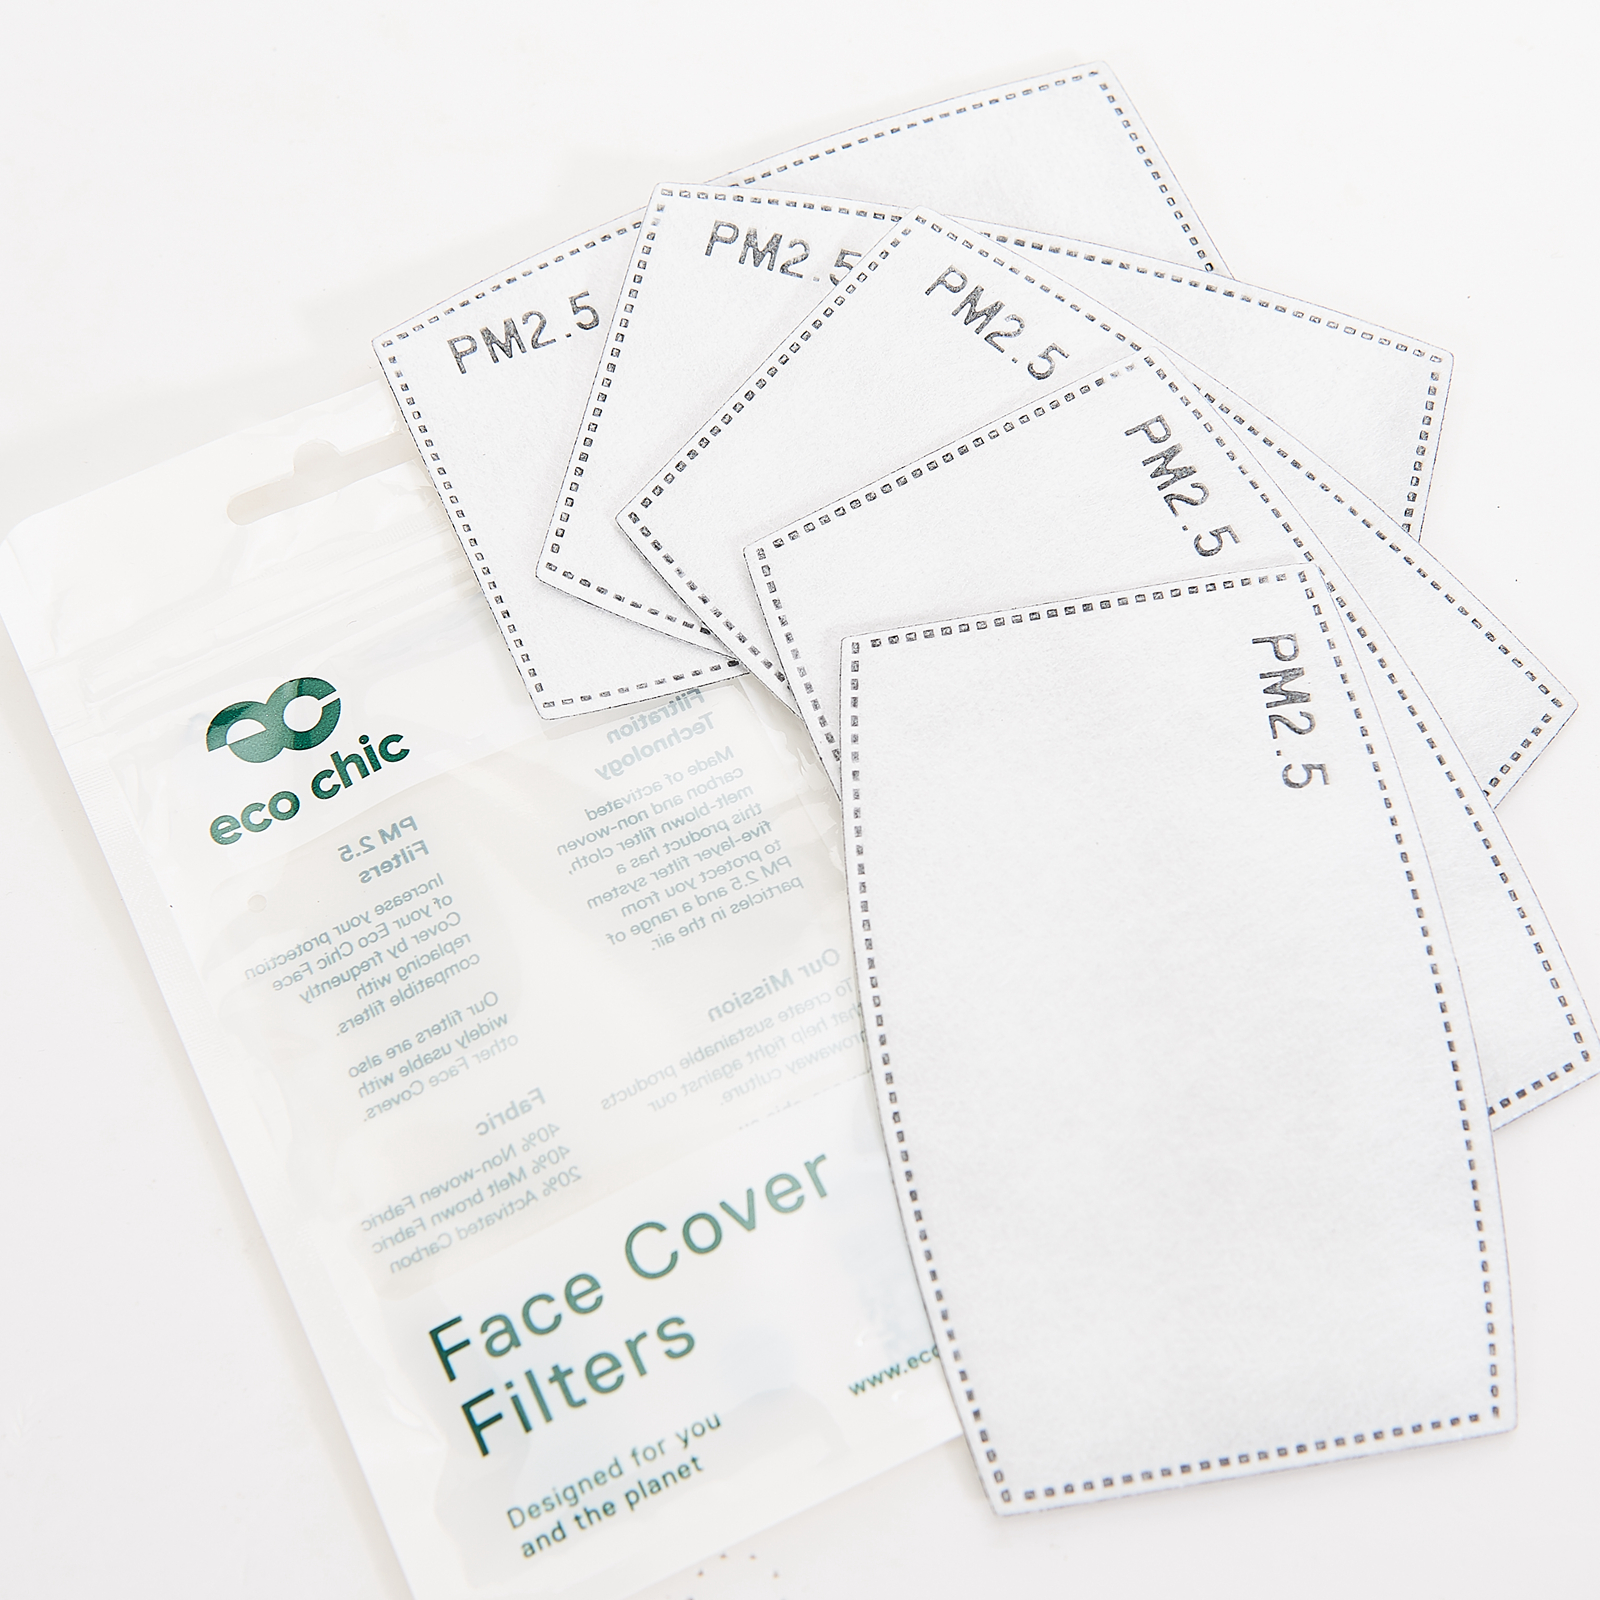 Filters for Face Covering